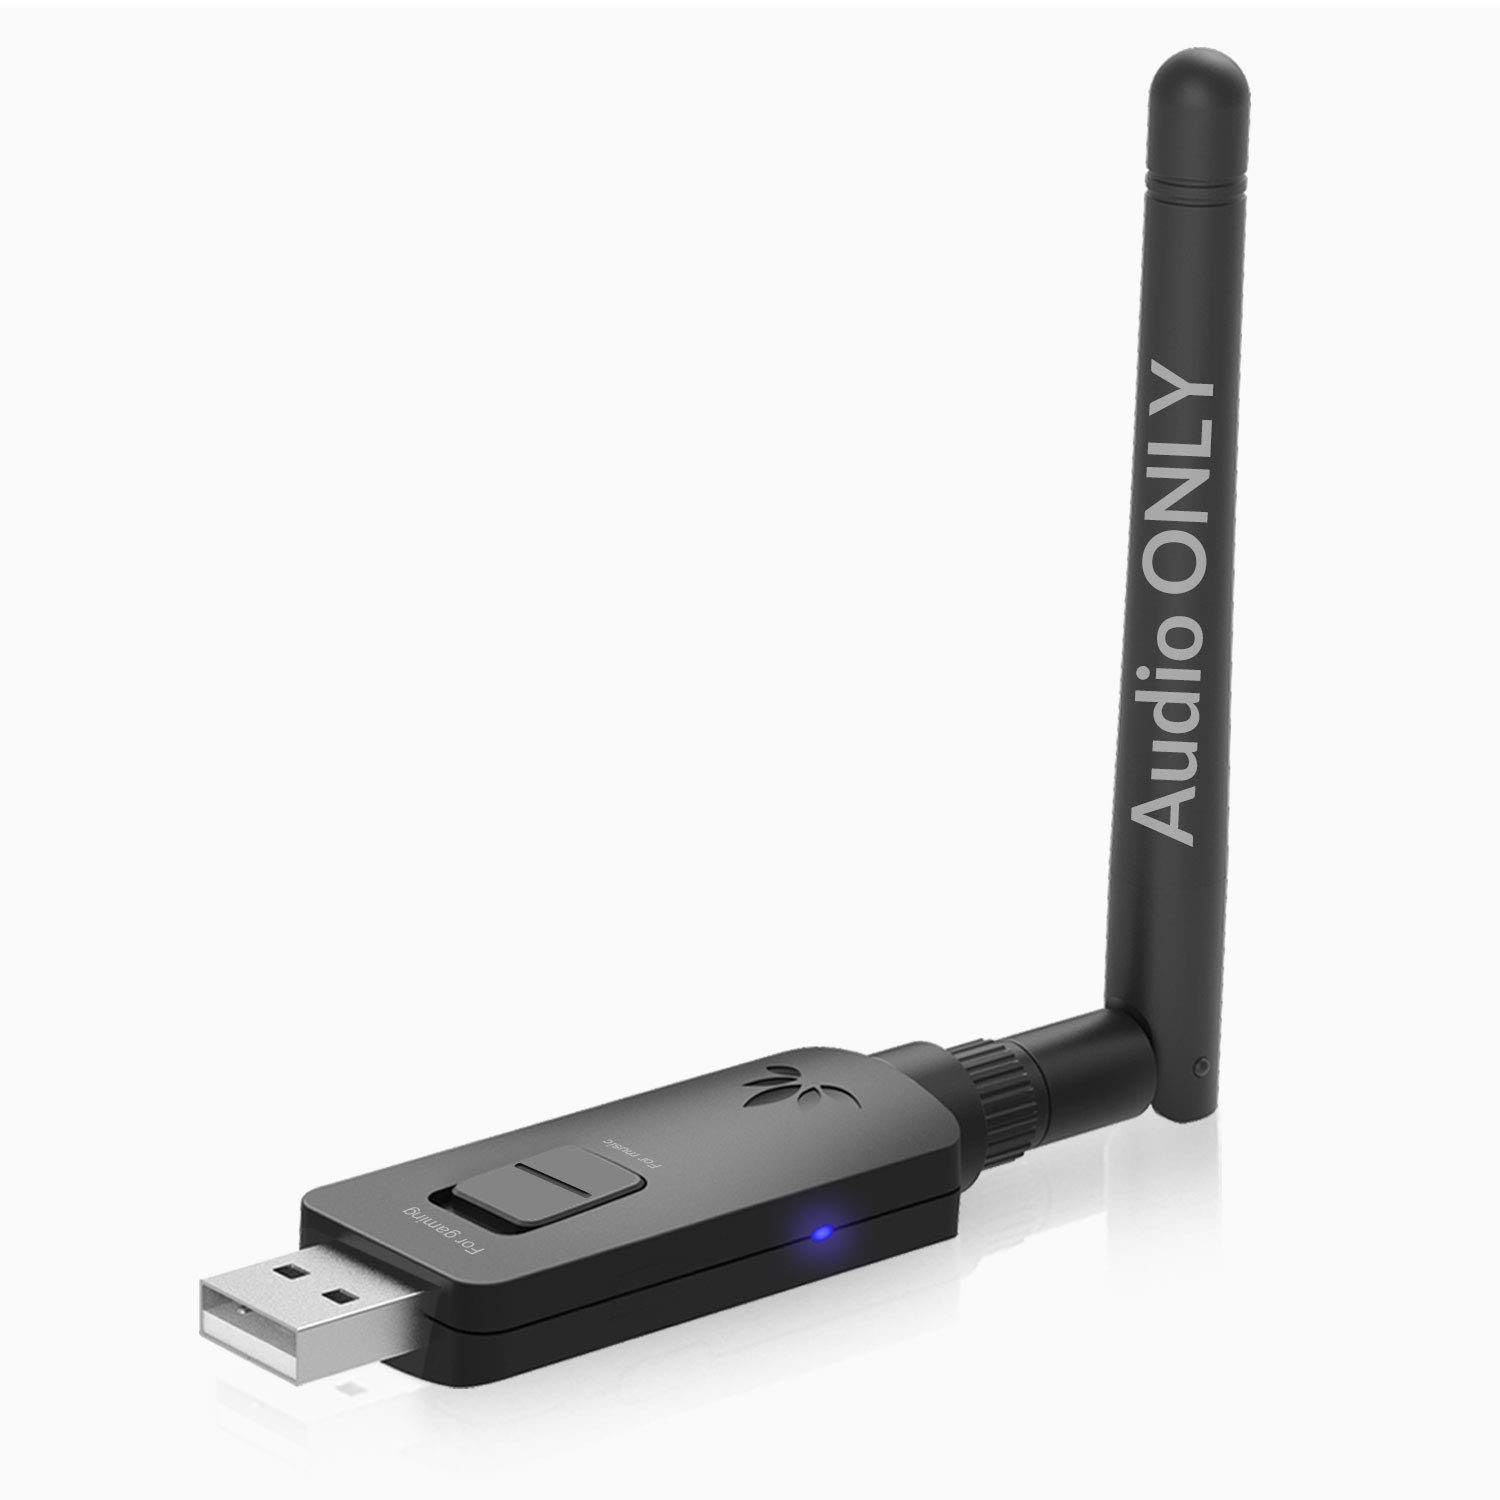 Avantree DG60 Long Range aptX Low Latency / HD Bluetooth 5.0 USB Audio Adapter Amazon $26.99  for PC Laptop Mac PS4 PS5 Linux, Wireless Dongle for Headphones Speakers, (Audio ONLY)